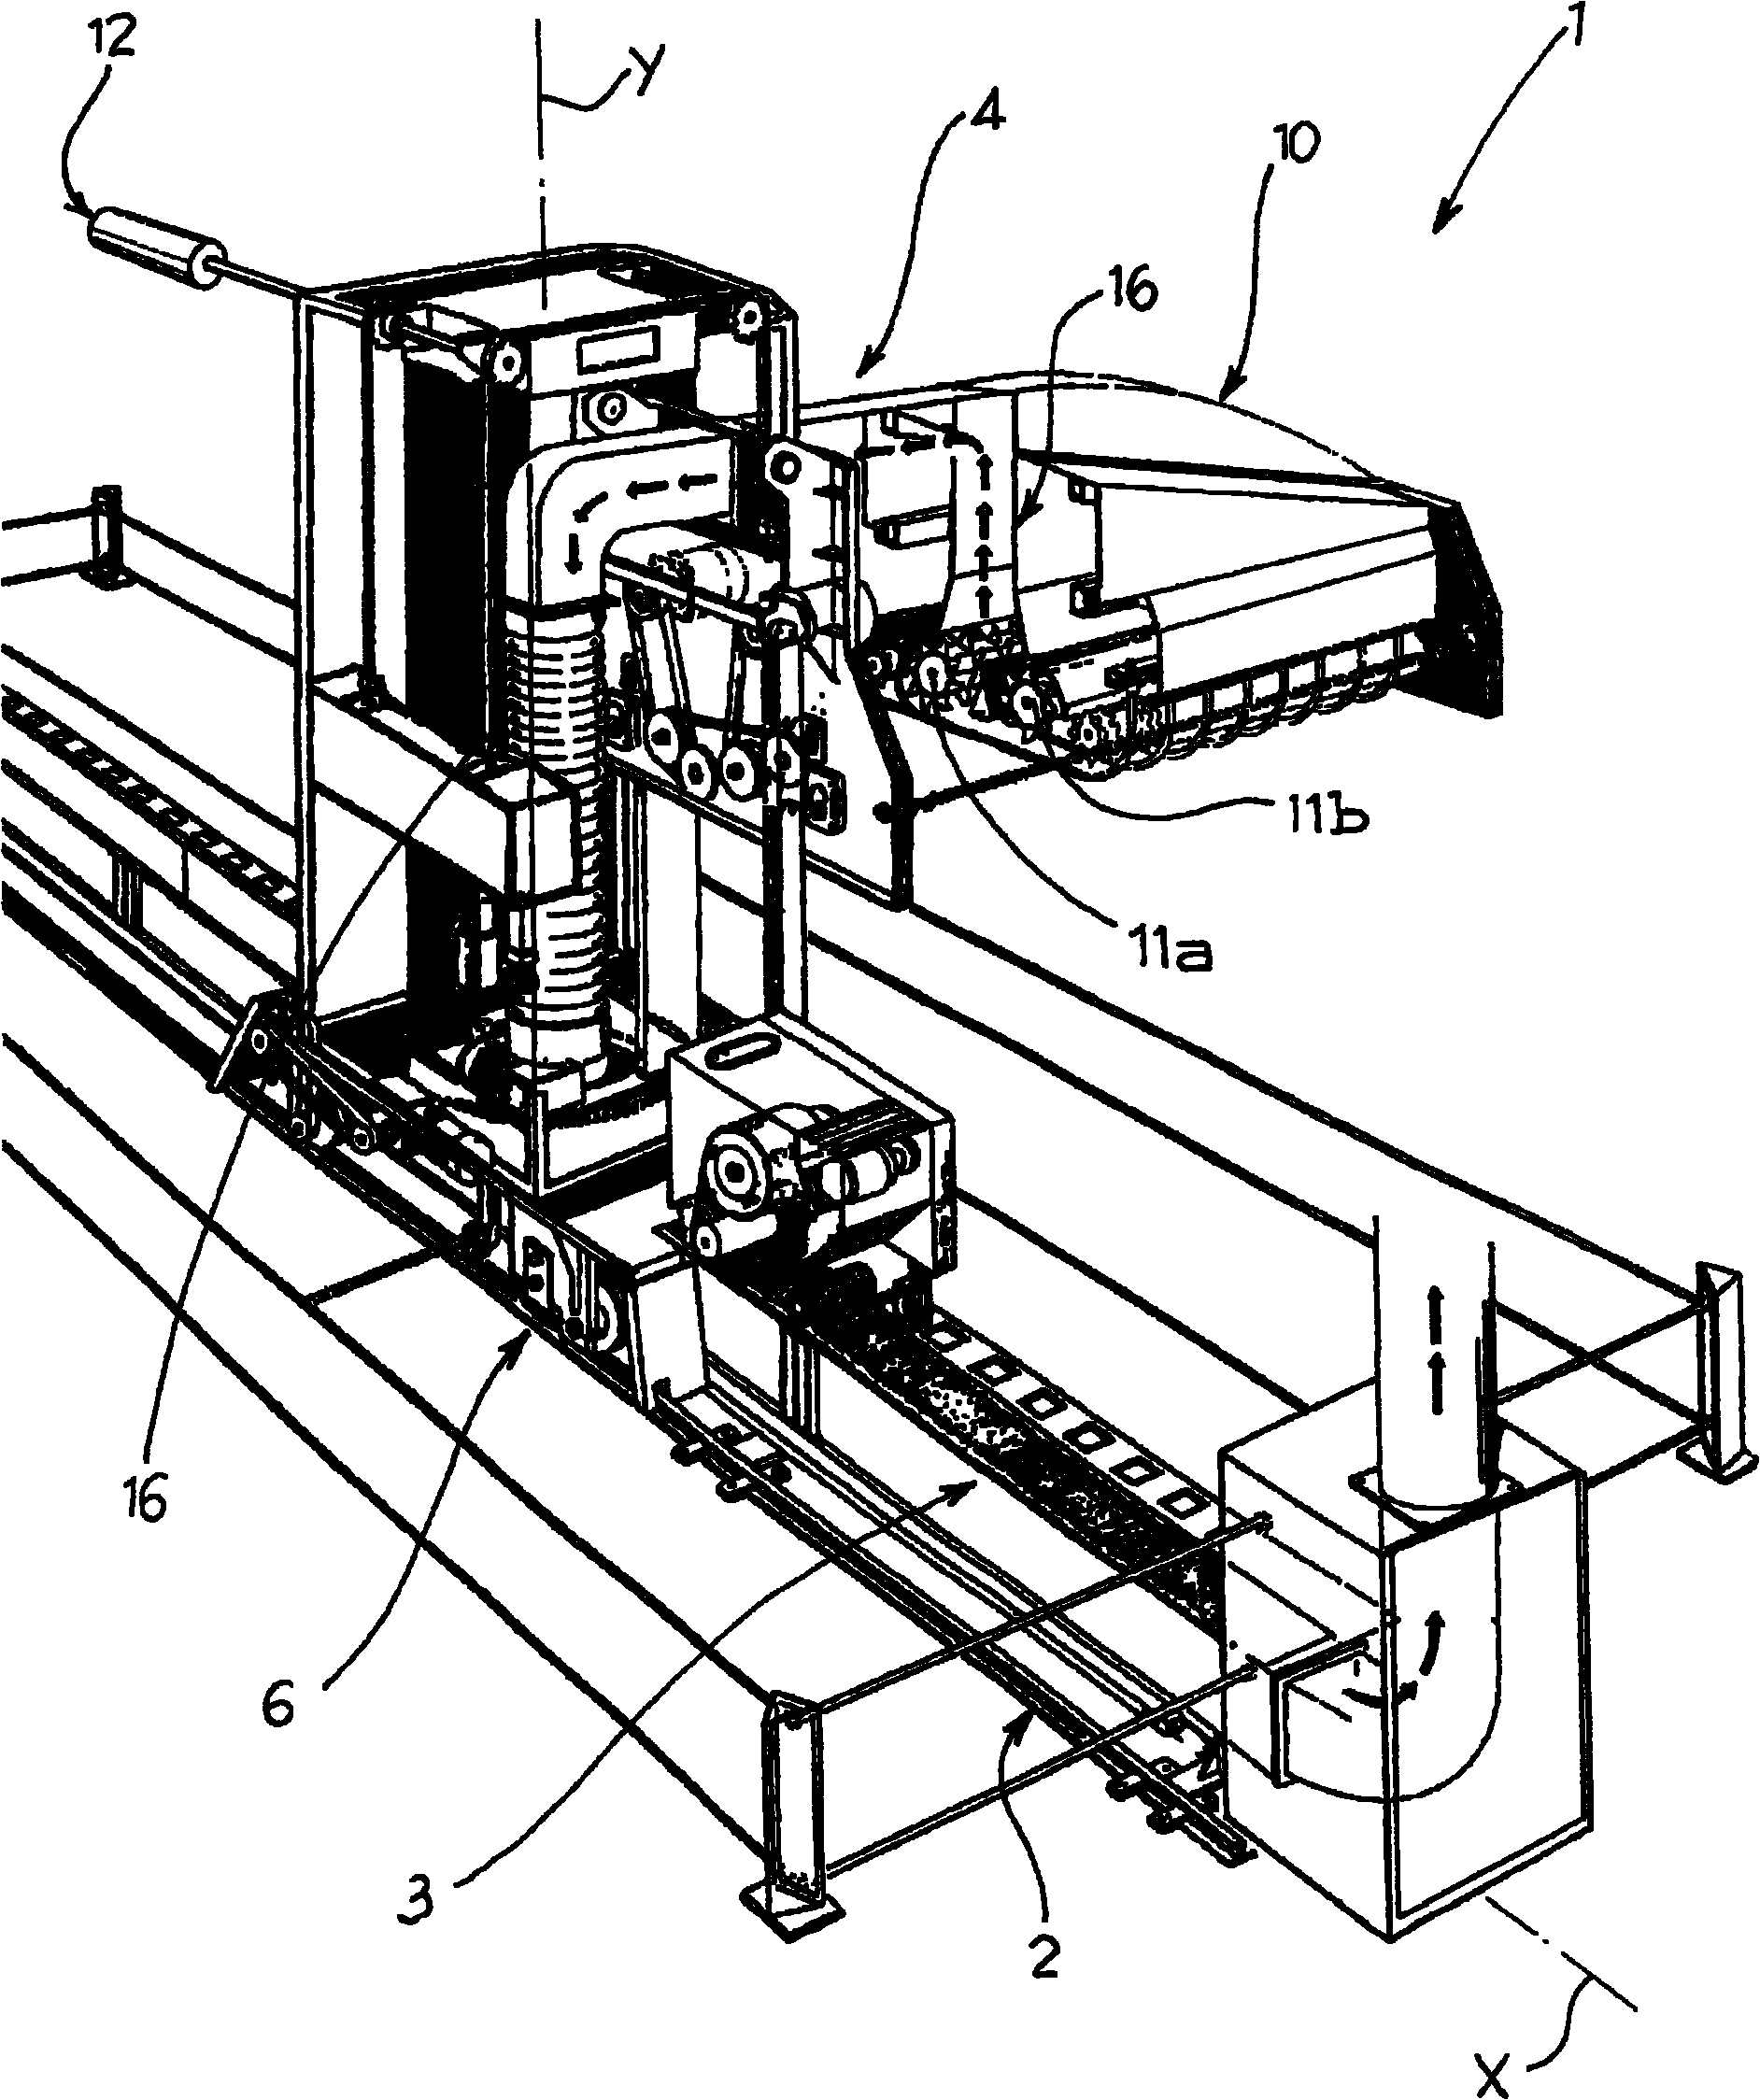 Device and method for the automatic pick-up of fibre from a bale of fibre on a spinning line